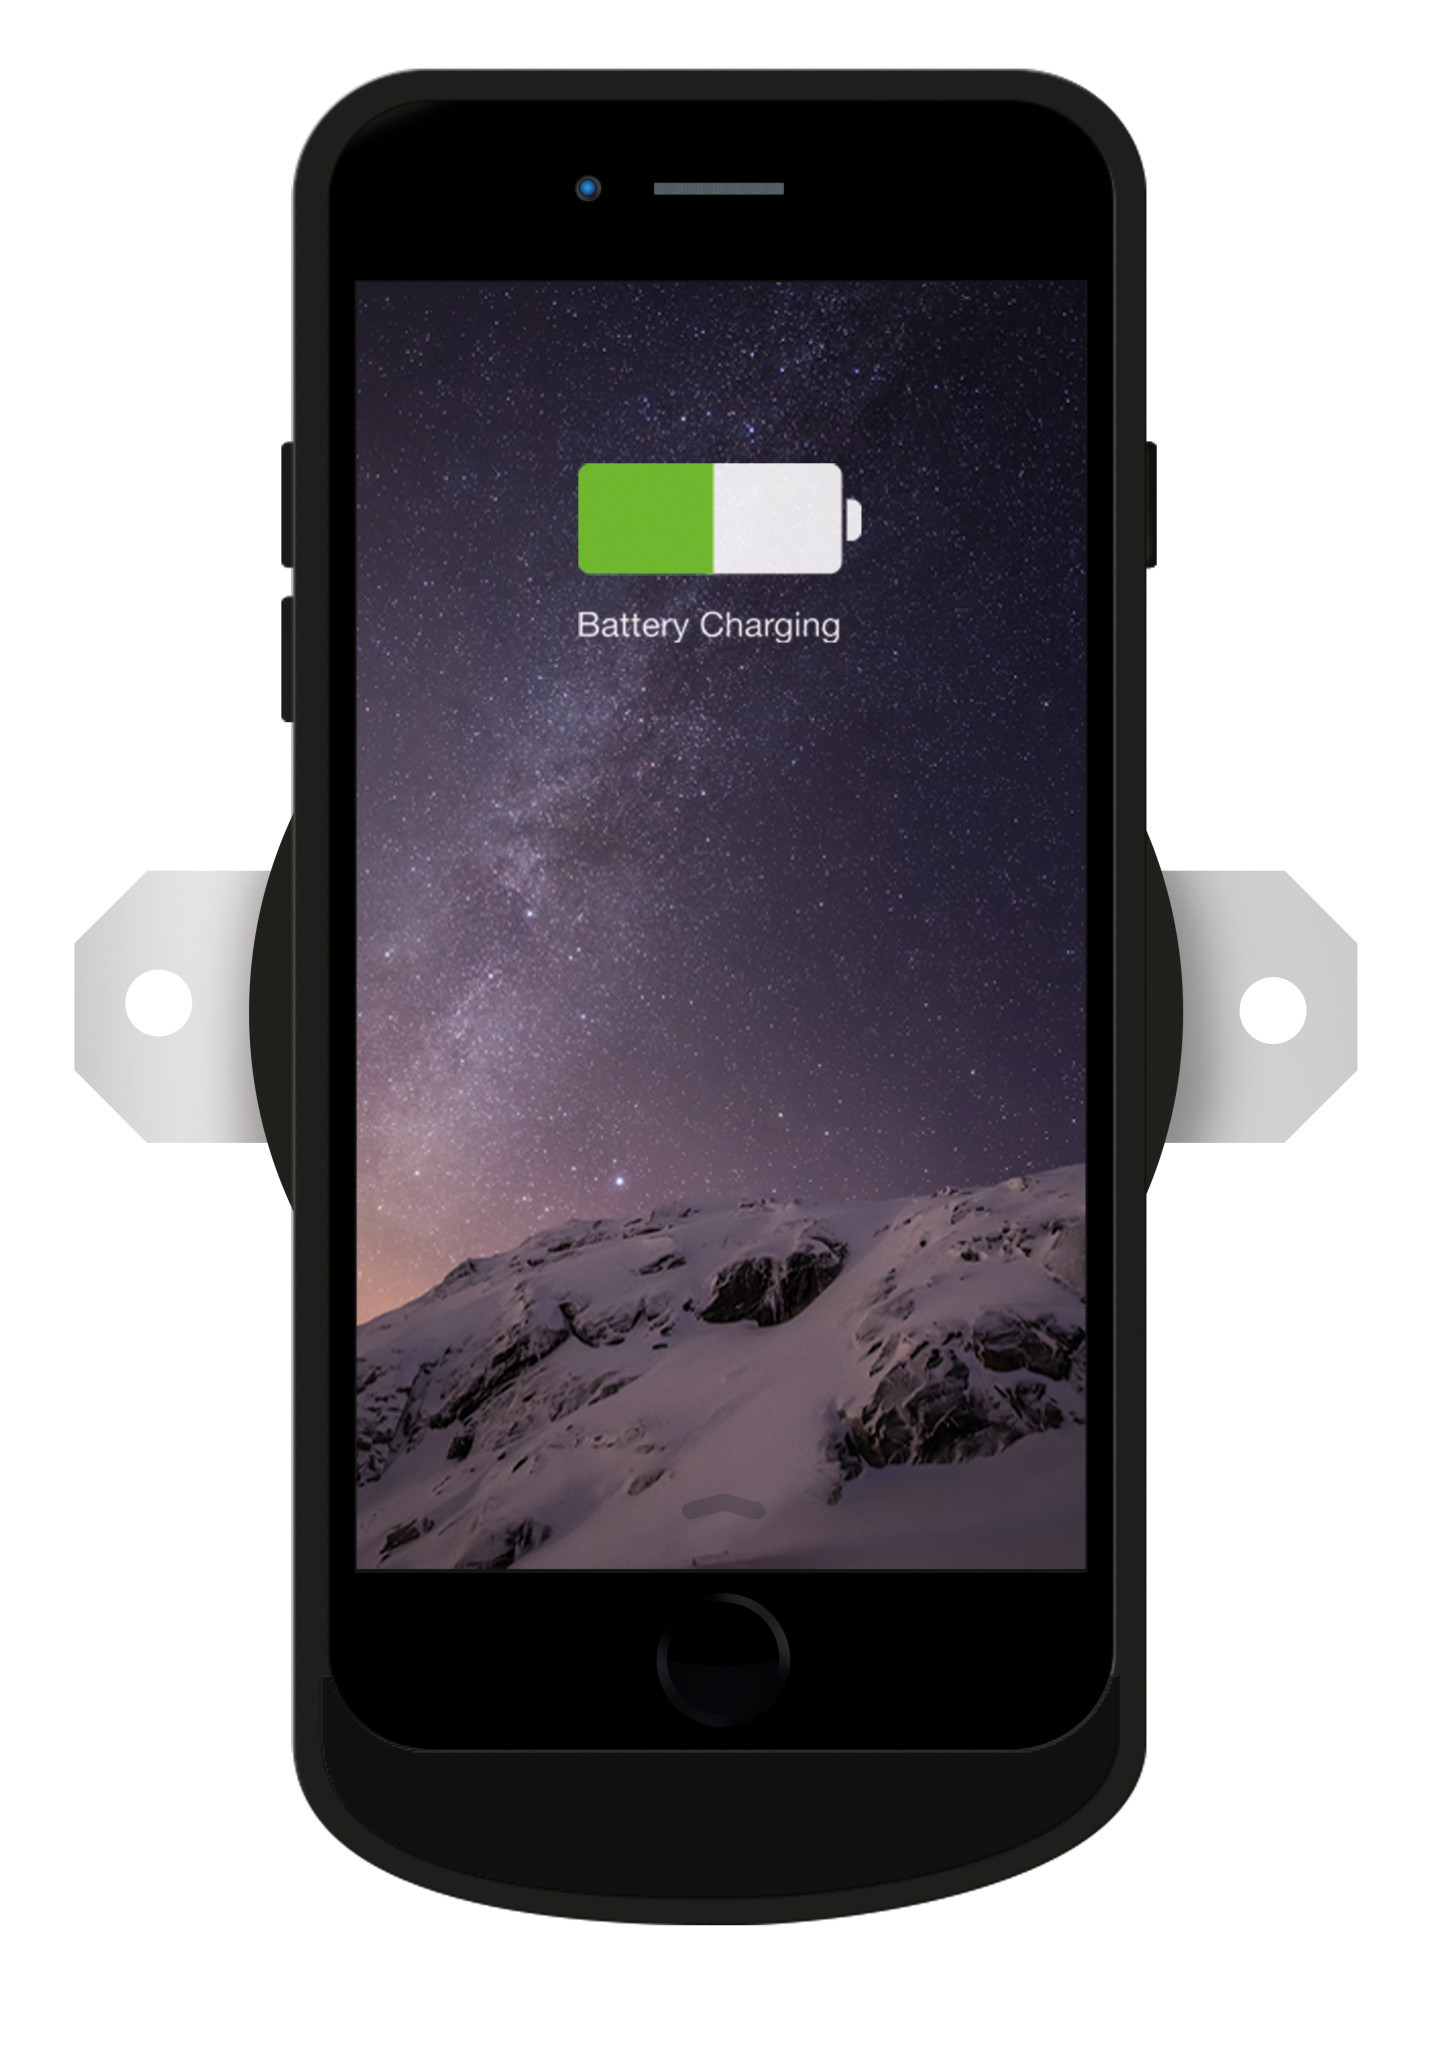 Apple iPhone 6 incl. Zens Wireless Charging Case on a Zens Built-in Wireless Charger Round Black